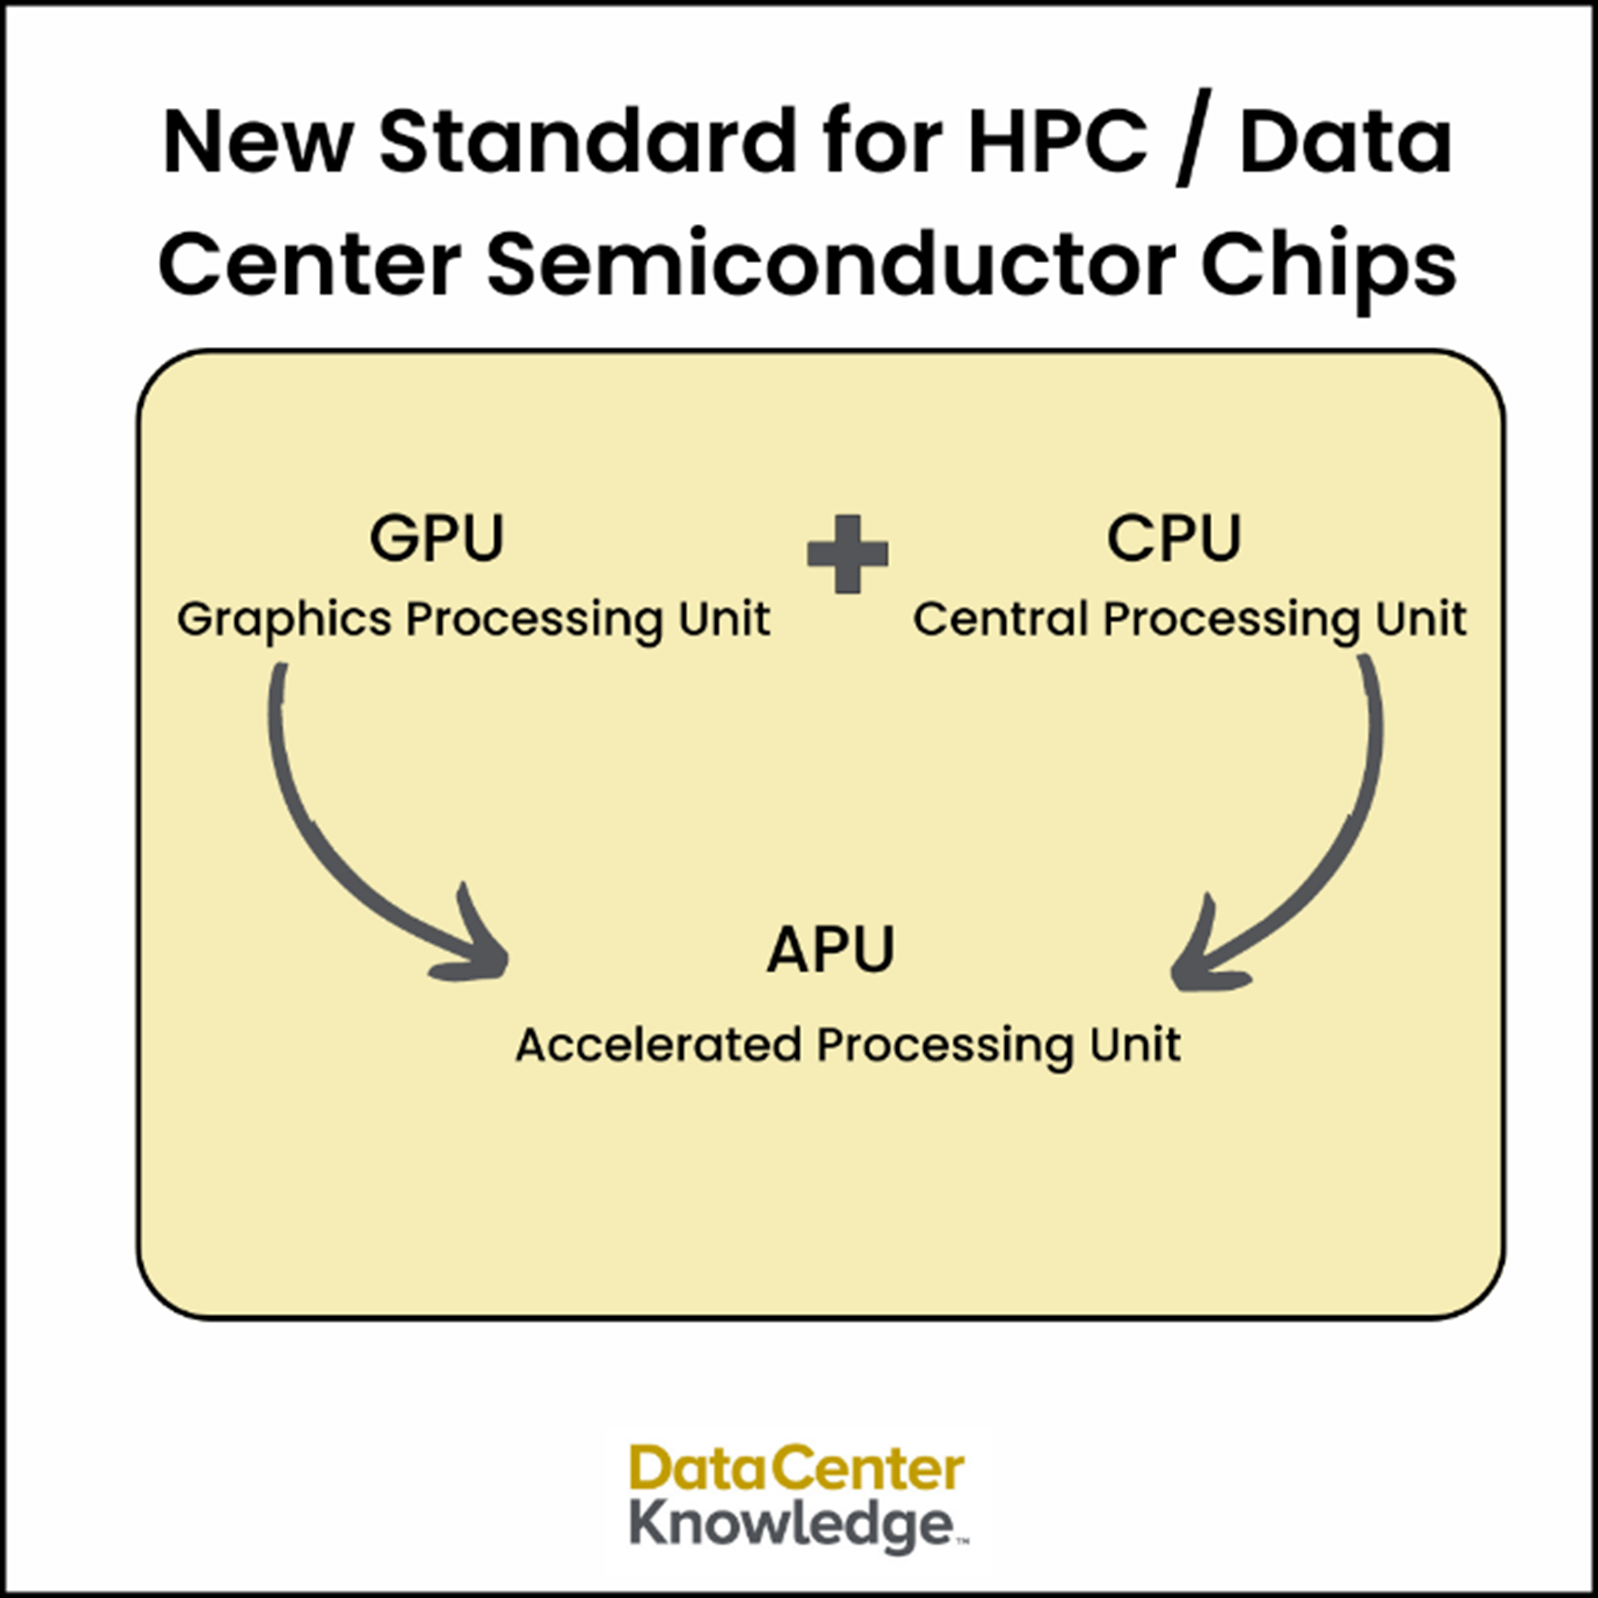 New Standard for HPC / Data Center Semiconductor Chips